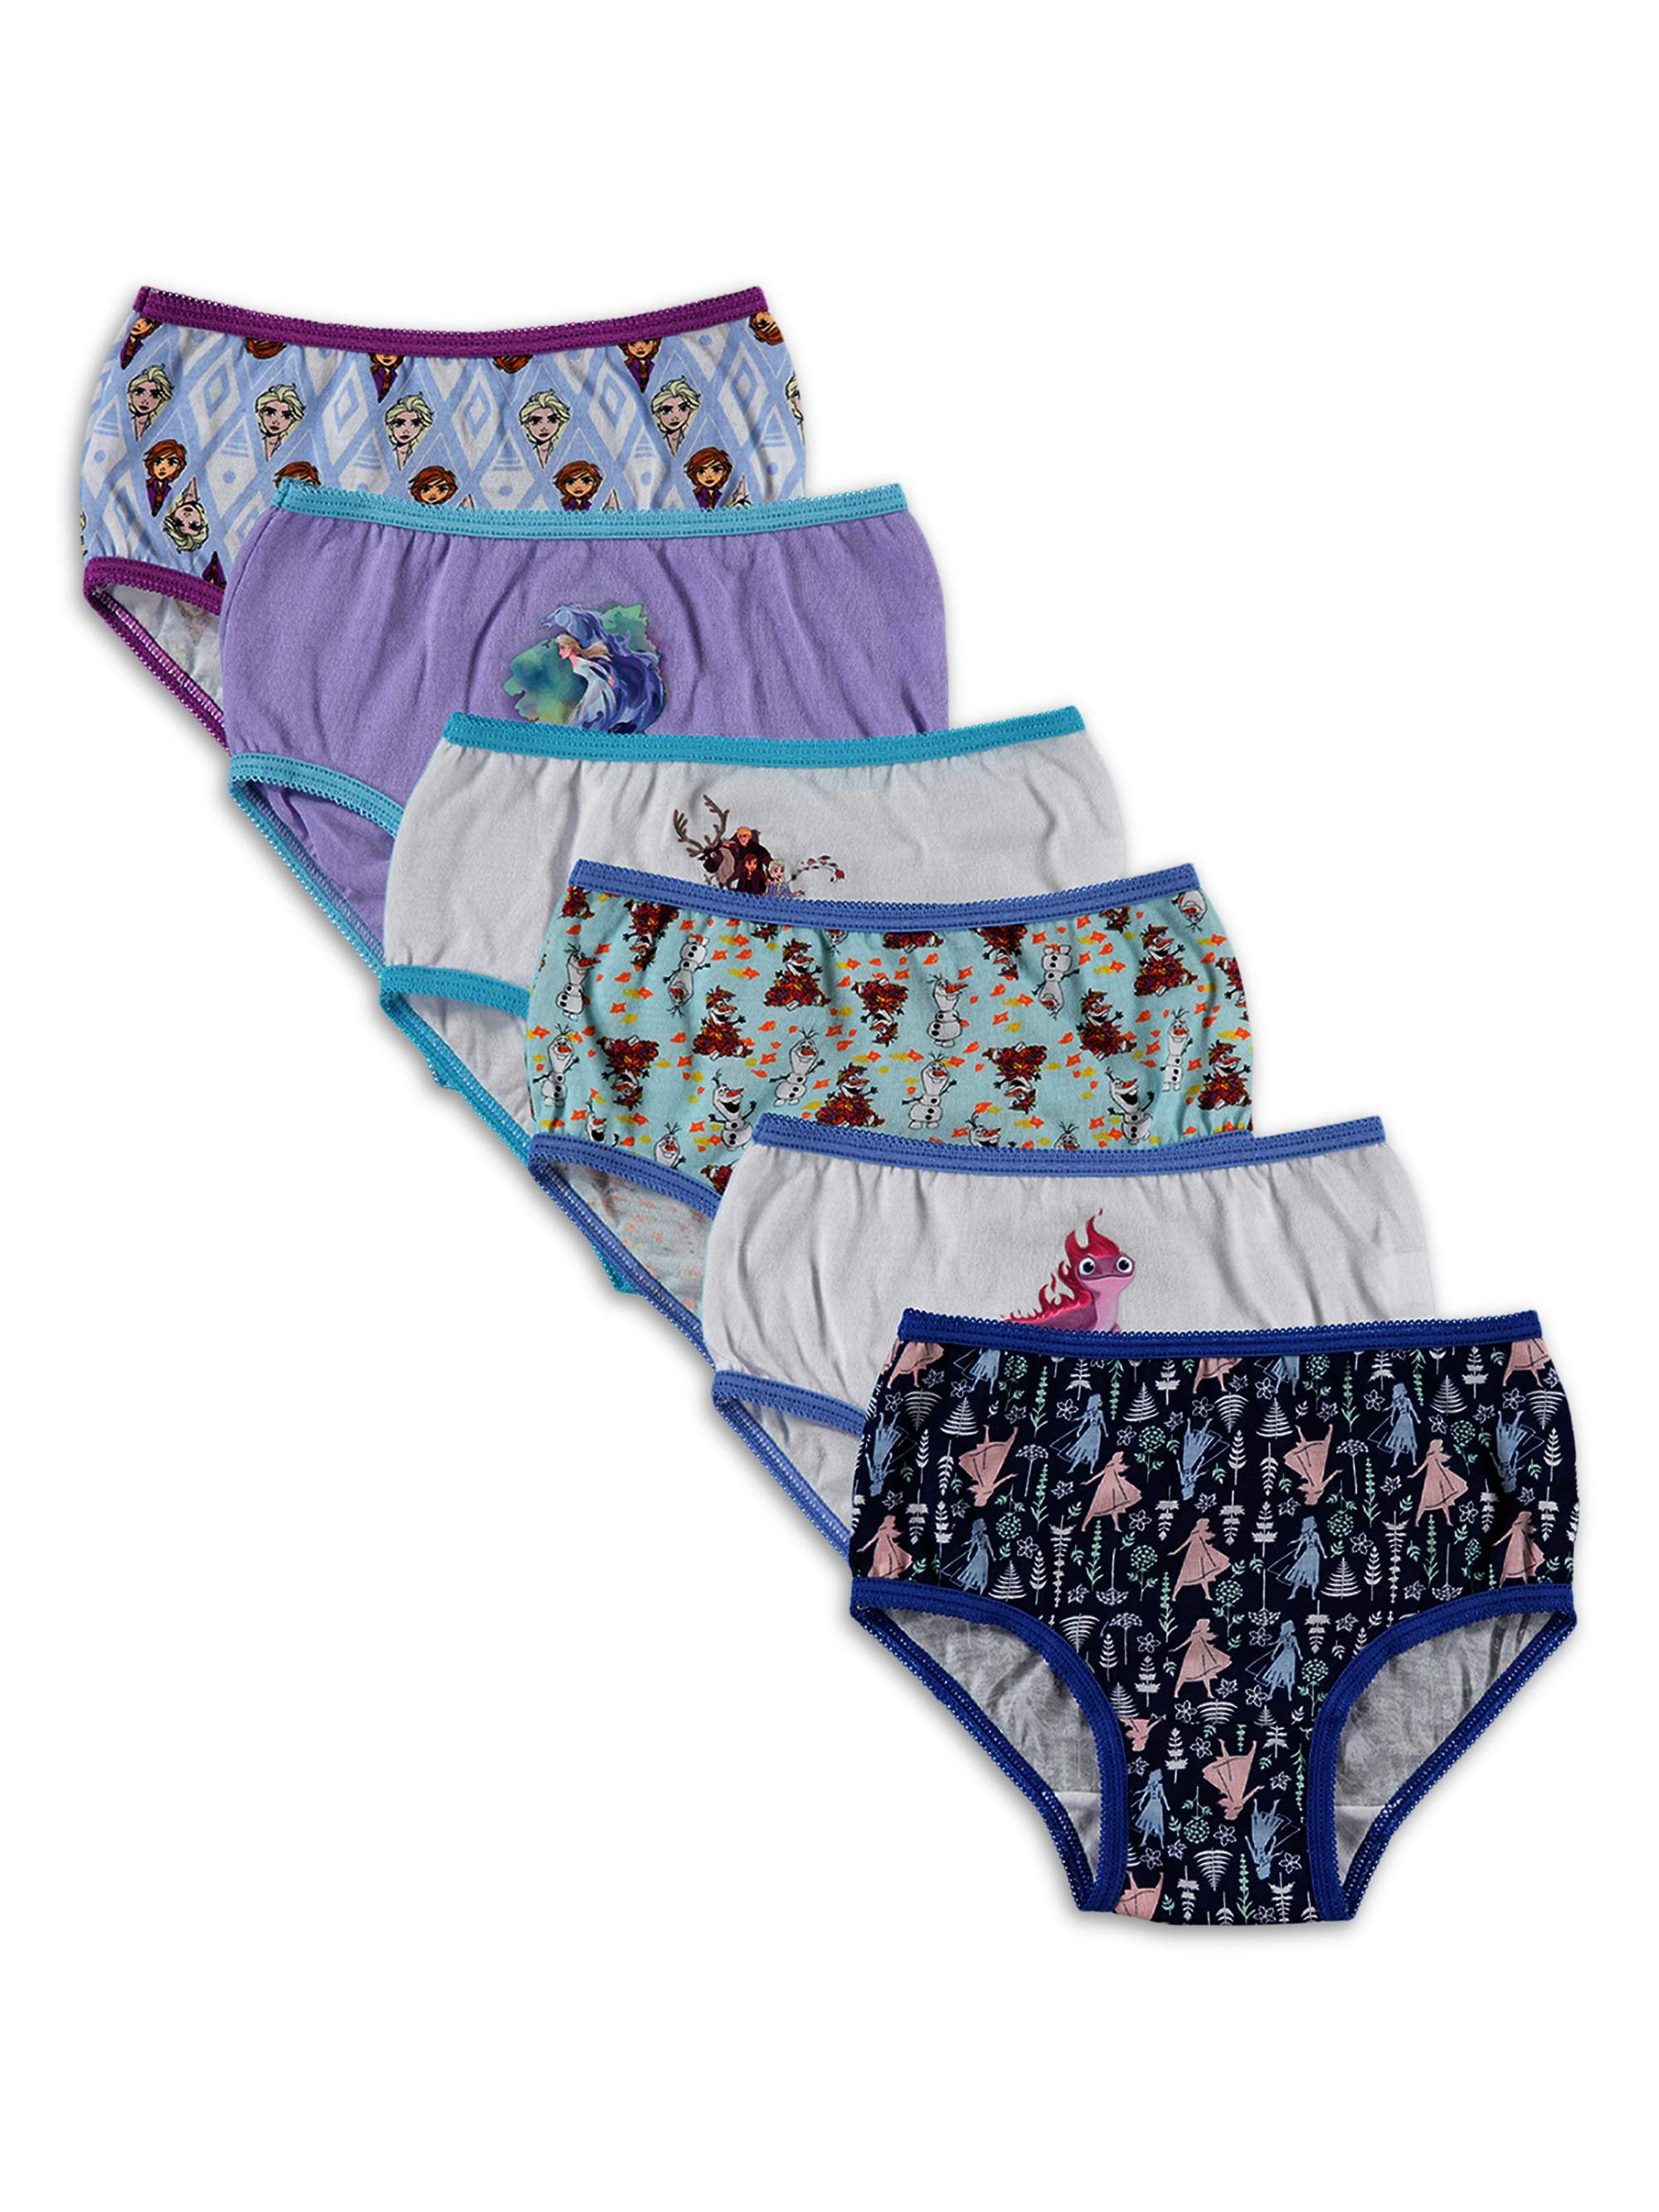 Gifts for Girls Toddlers Disney Princess Girls Knickers Pack of 5 Girls Pants with Characters Cinderella Ariel Belle Jasmine 100/% Cotton Girls Underwear